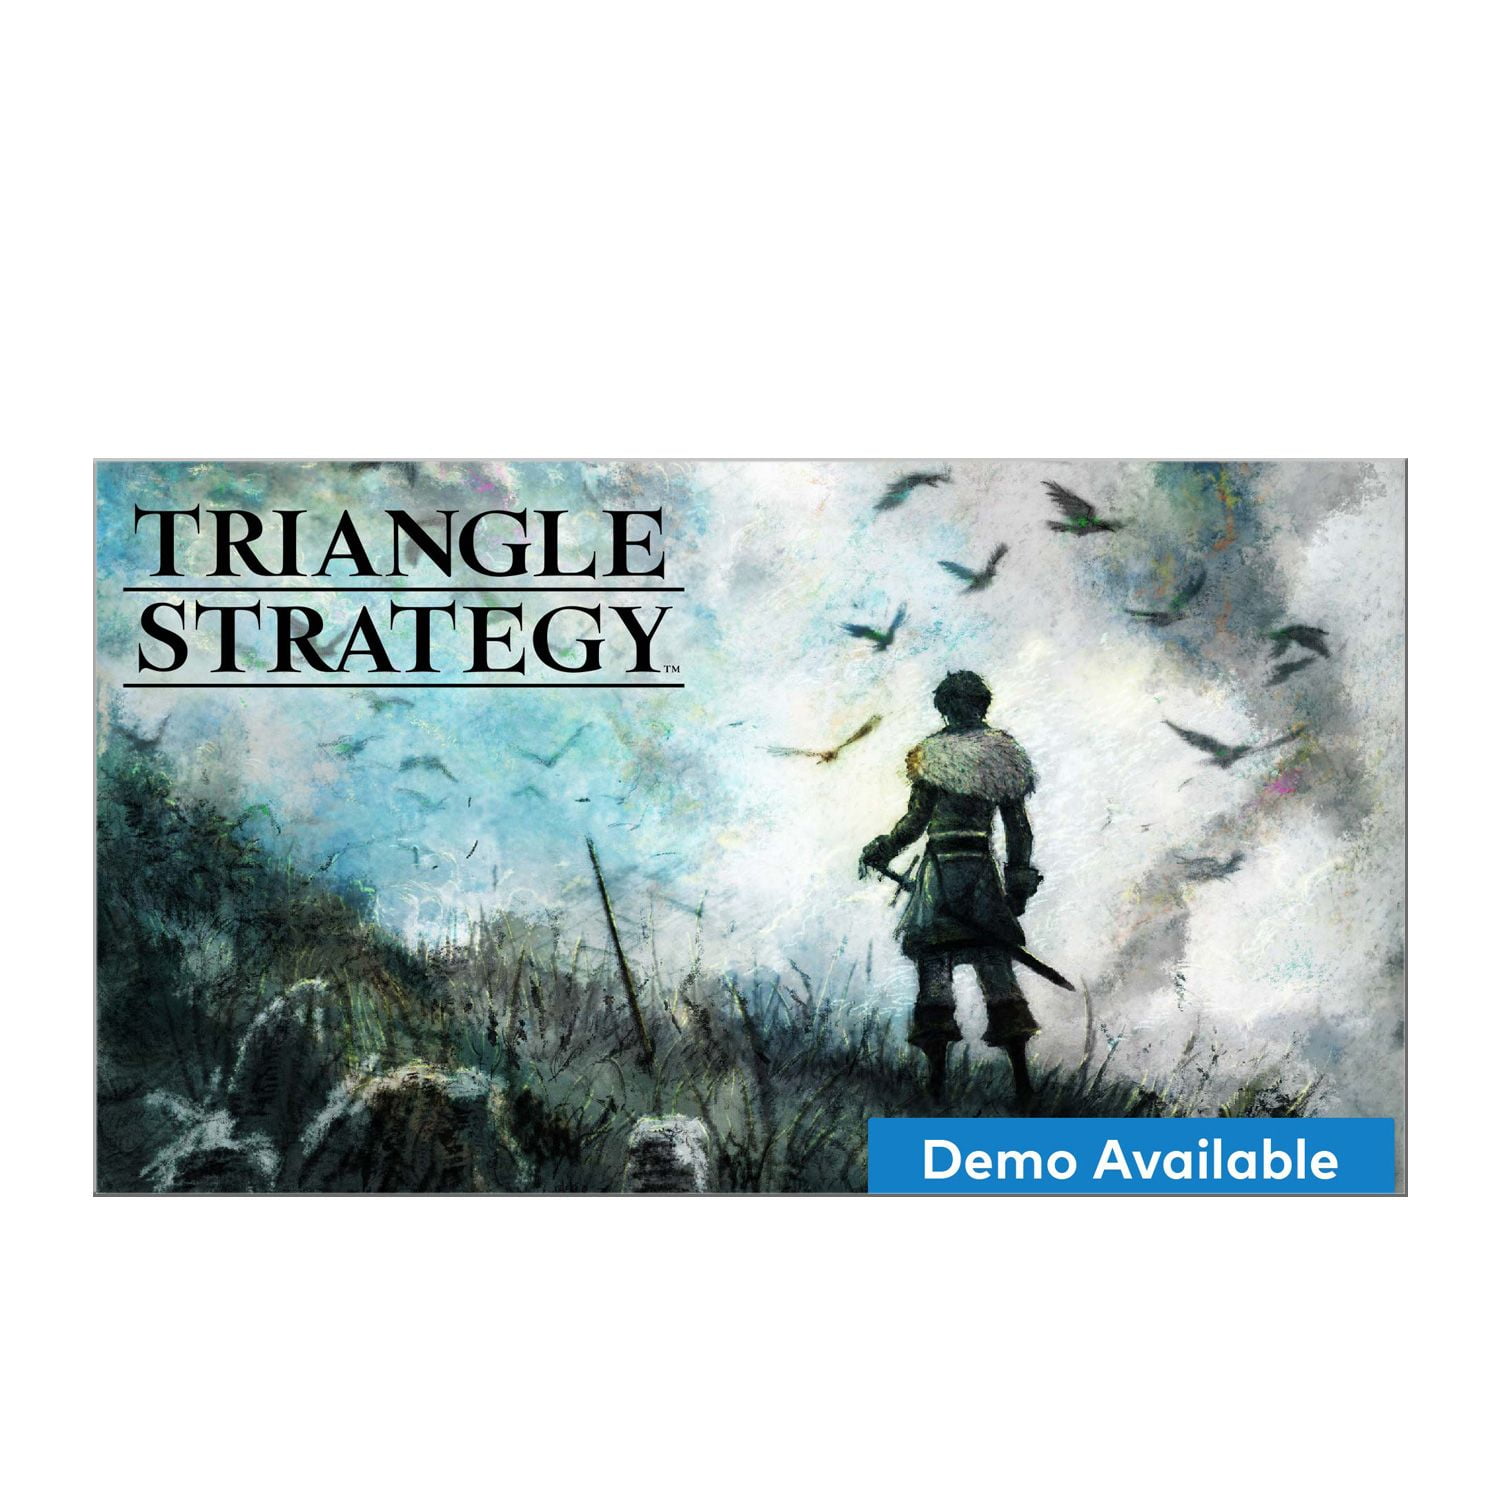 Project Triangle Strategy Demo Available Now On Nintendo Switch